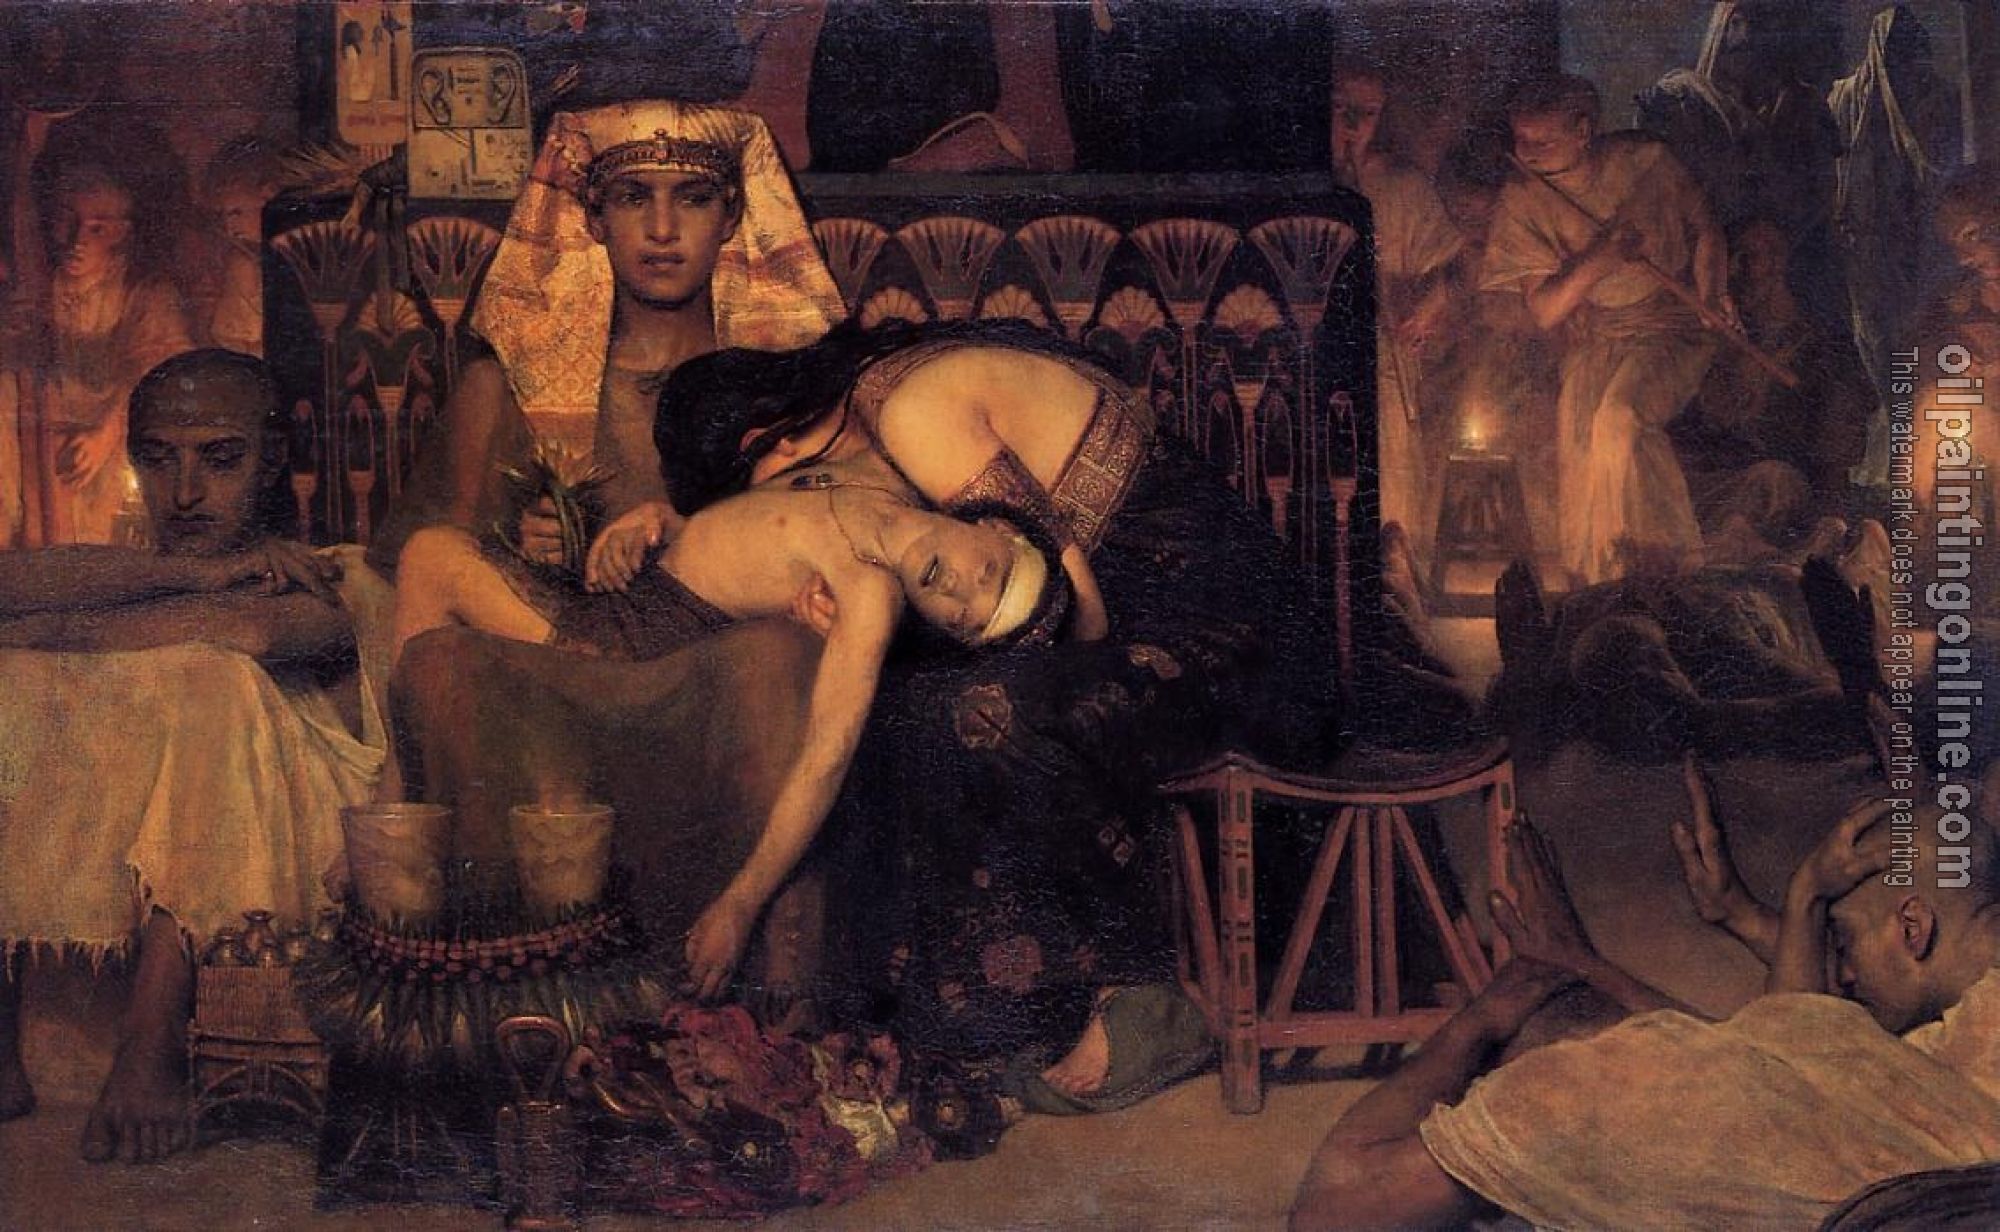 Alma-Tadema, Sir Lawrence - The Death of the First Born